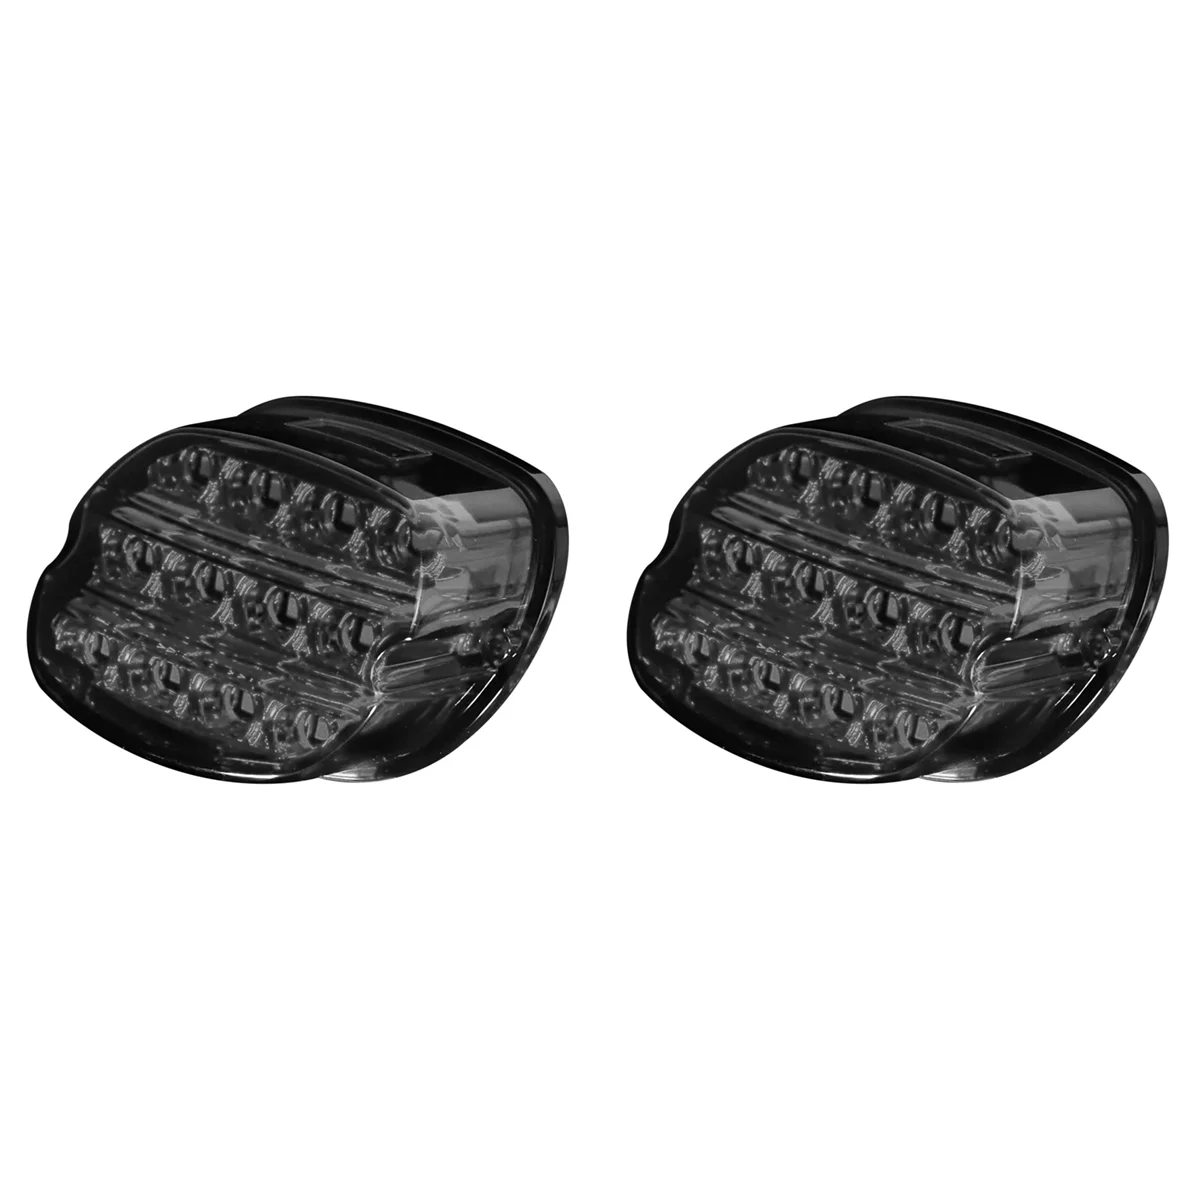 

2X Motorcycle 12V LED Smoked Housing Brake Tail Light License Plate Tail Light for Harley Glide 883 1200